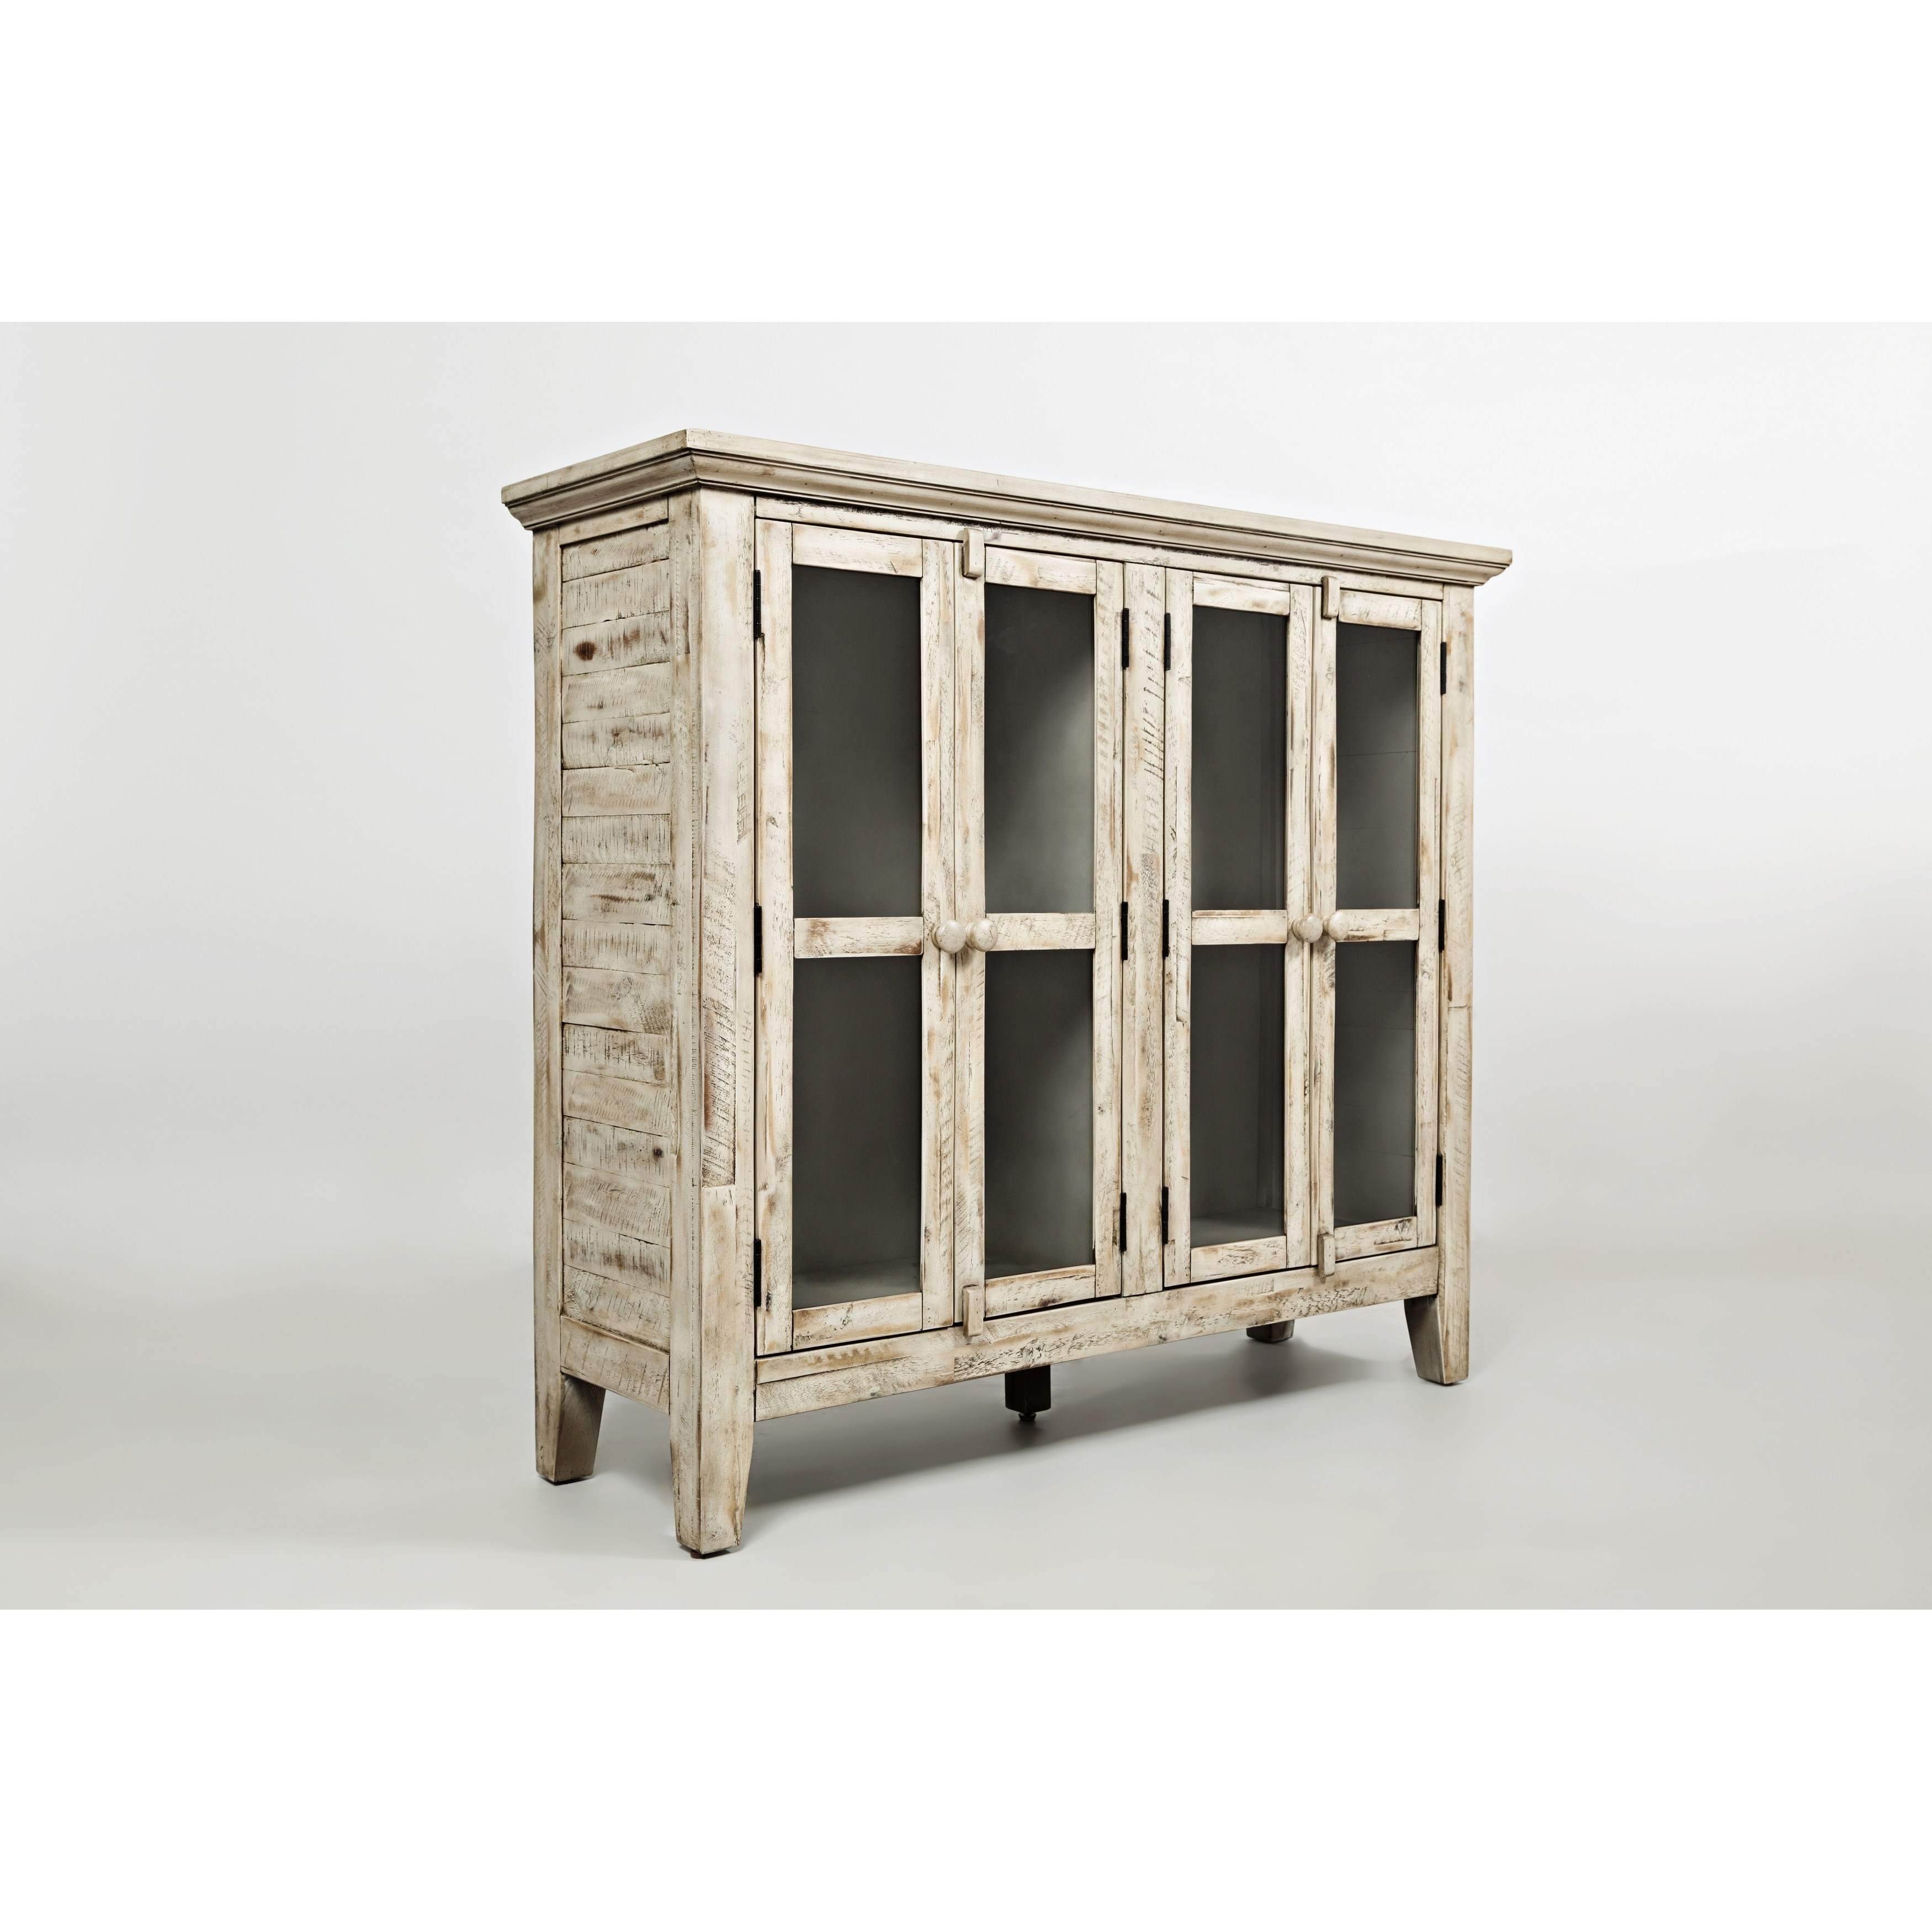 distressed wooden accent cabinet with glass doors off white table free shipping today black side laminate paint concrete top outdoor dining oak lamp west elm wall shelf wood room